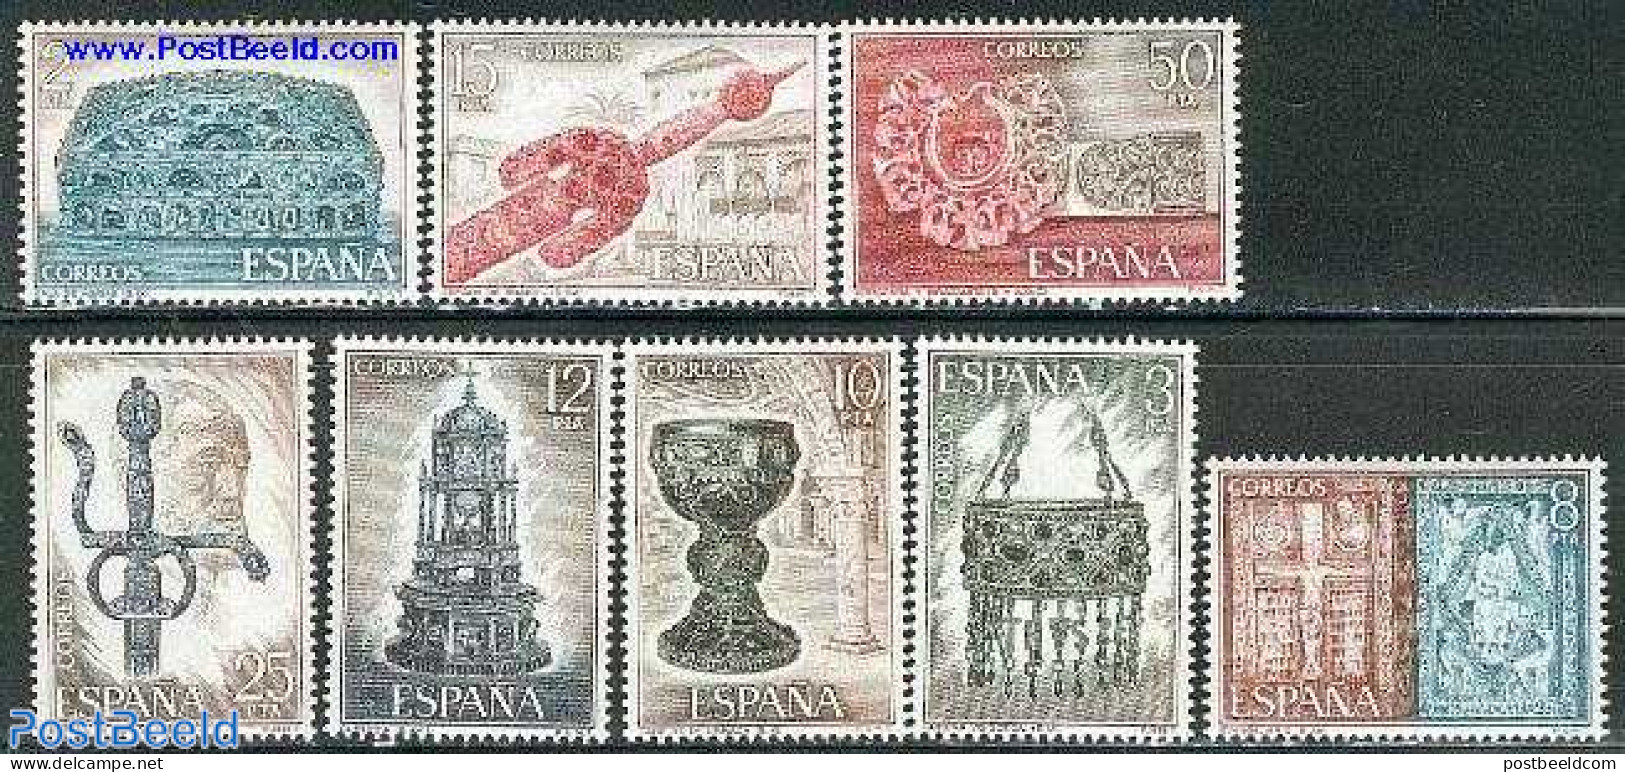 Spain 1975 ESPANA 75 8V, Mint NH, Art - Art & Antique Objects - Unused Stamps